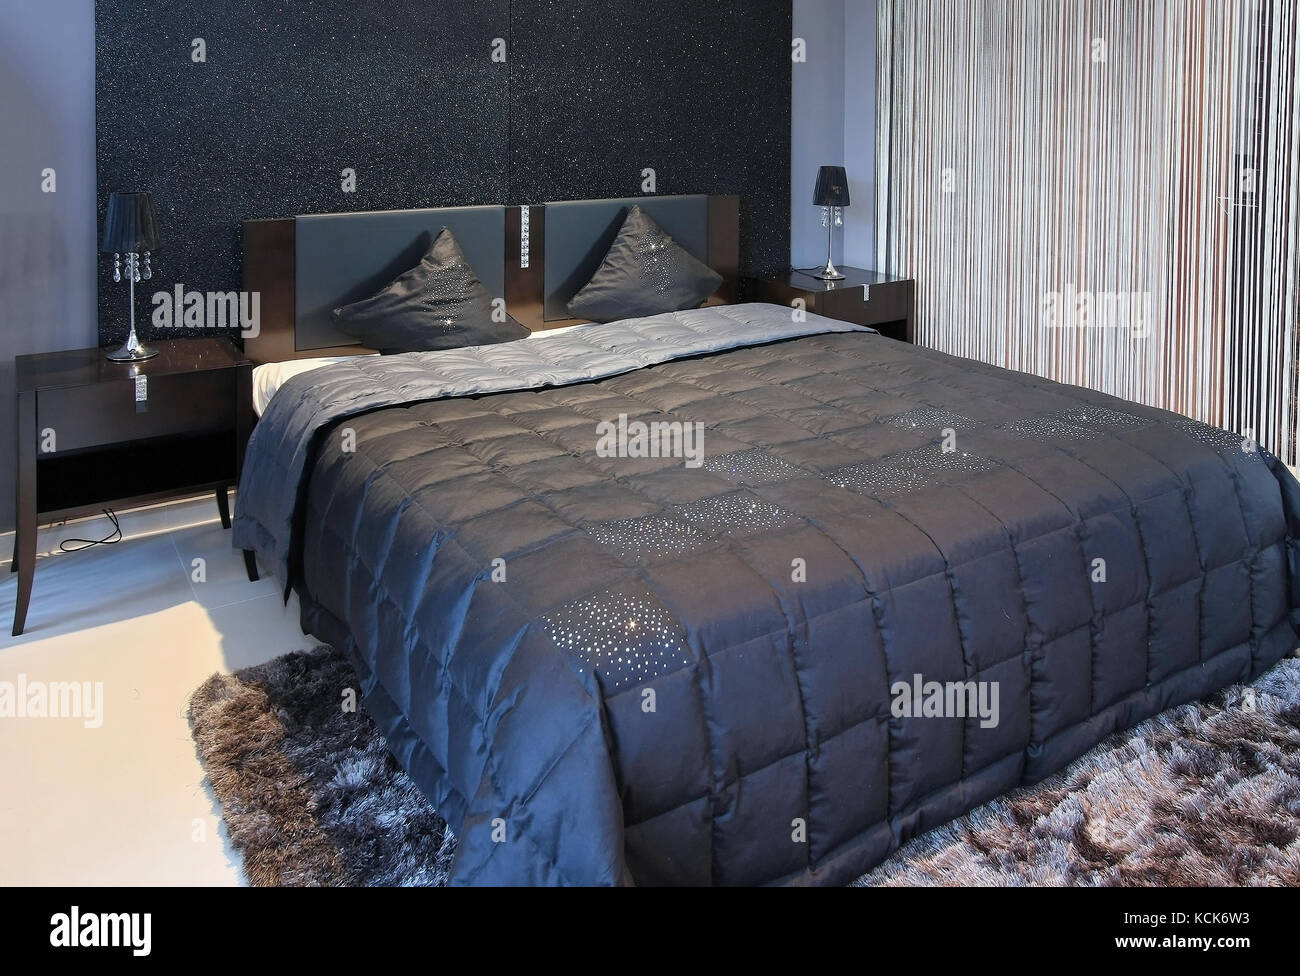 Modern bedroom interior with sparkling black wall and double bad ...